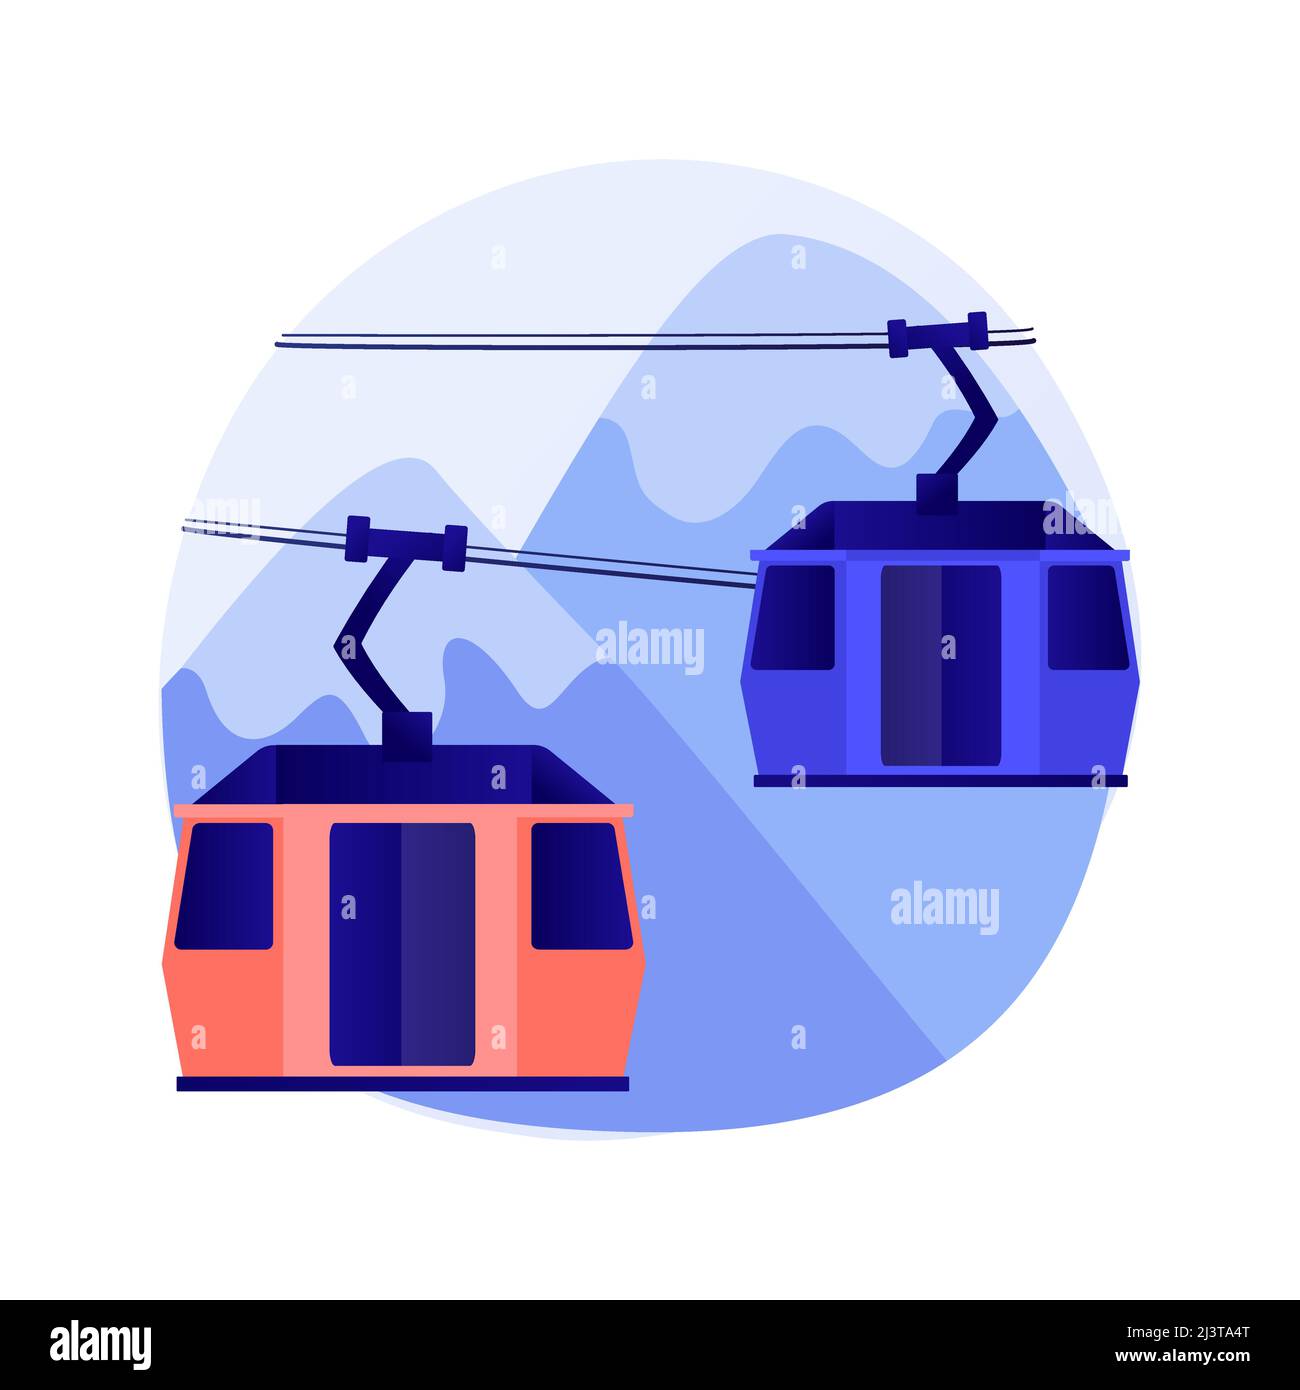 Cable transport abstract concept vector illustration. Cable ways, transport modes, ev electric car bus, old funicular, trolleybus, carrying tourists, Stock Vector